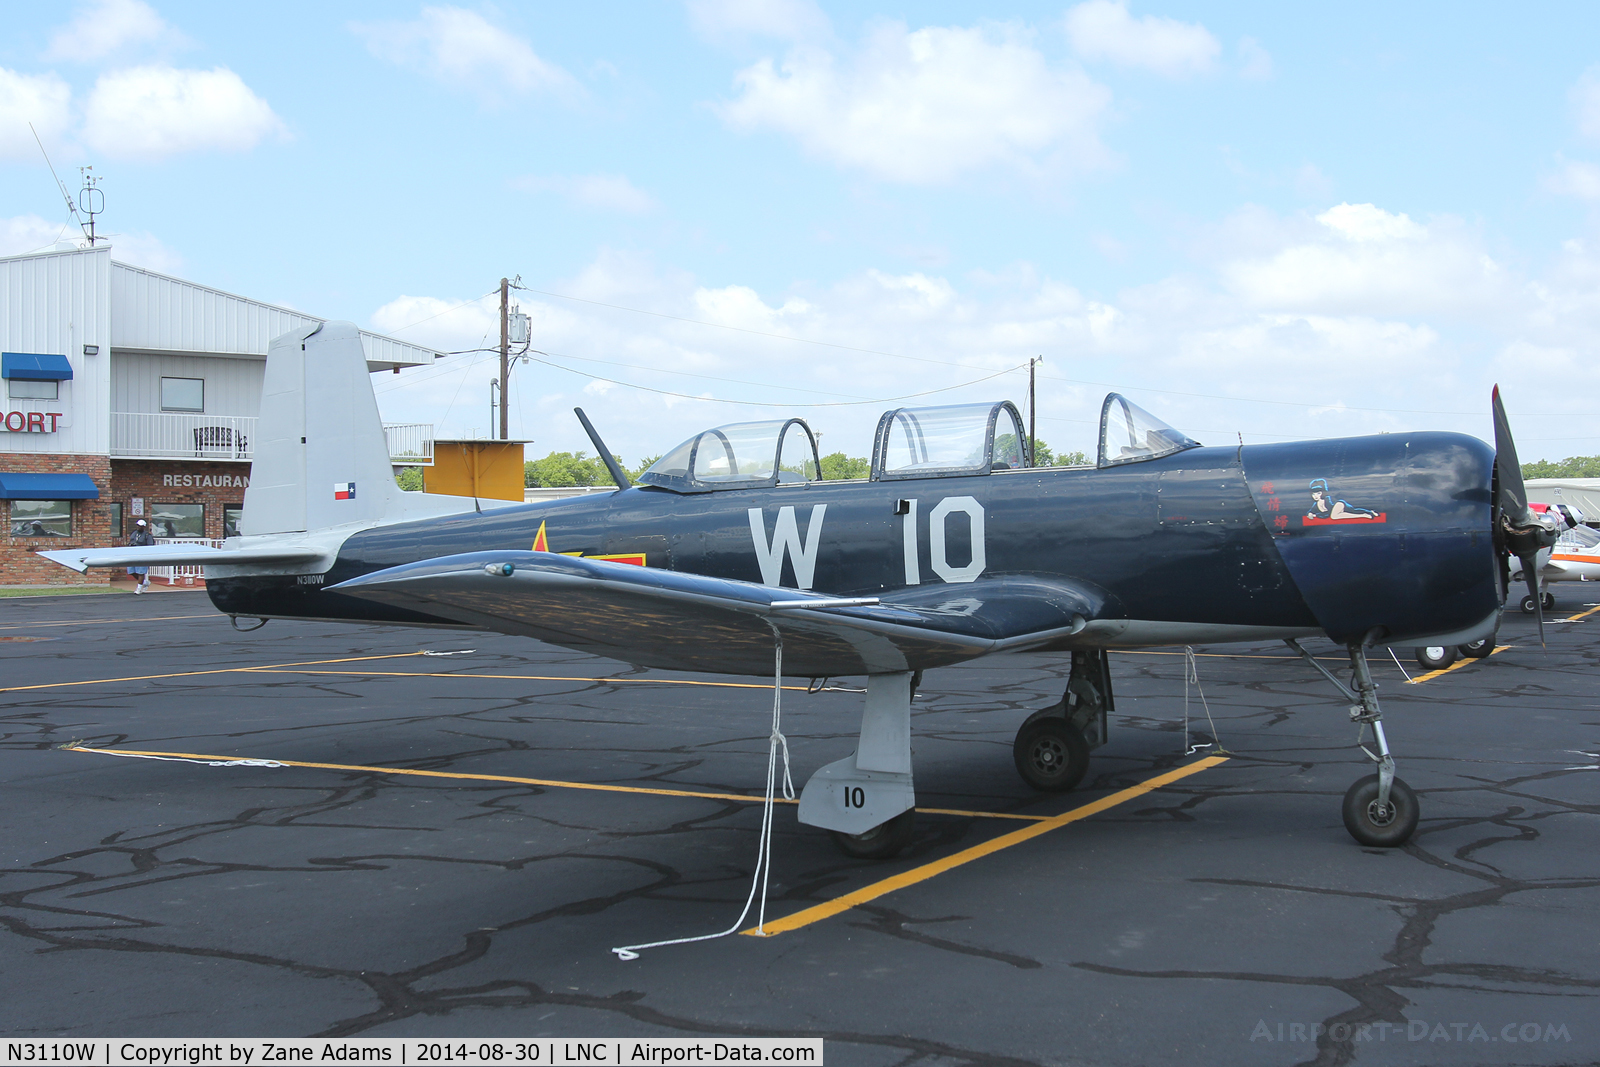 N3110W, 1965 Nanchang CJ-6A C/N 1332014, At the 2014 Warbirds on Parade